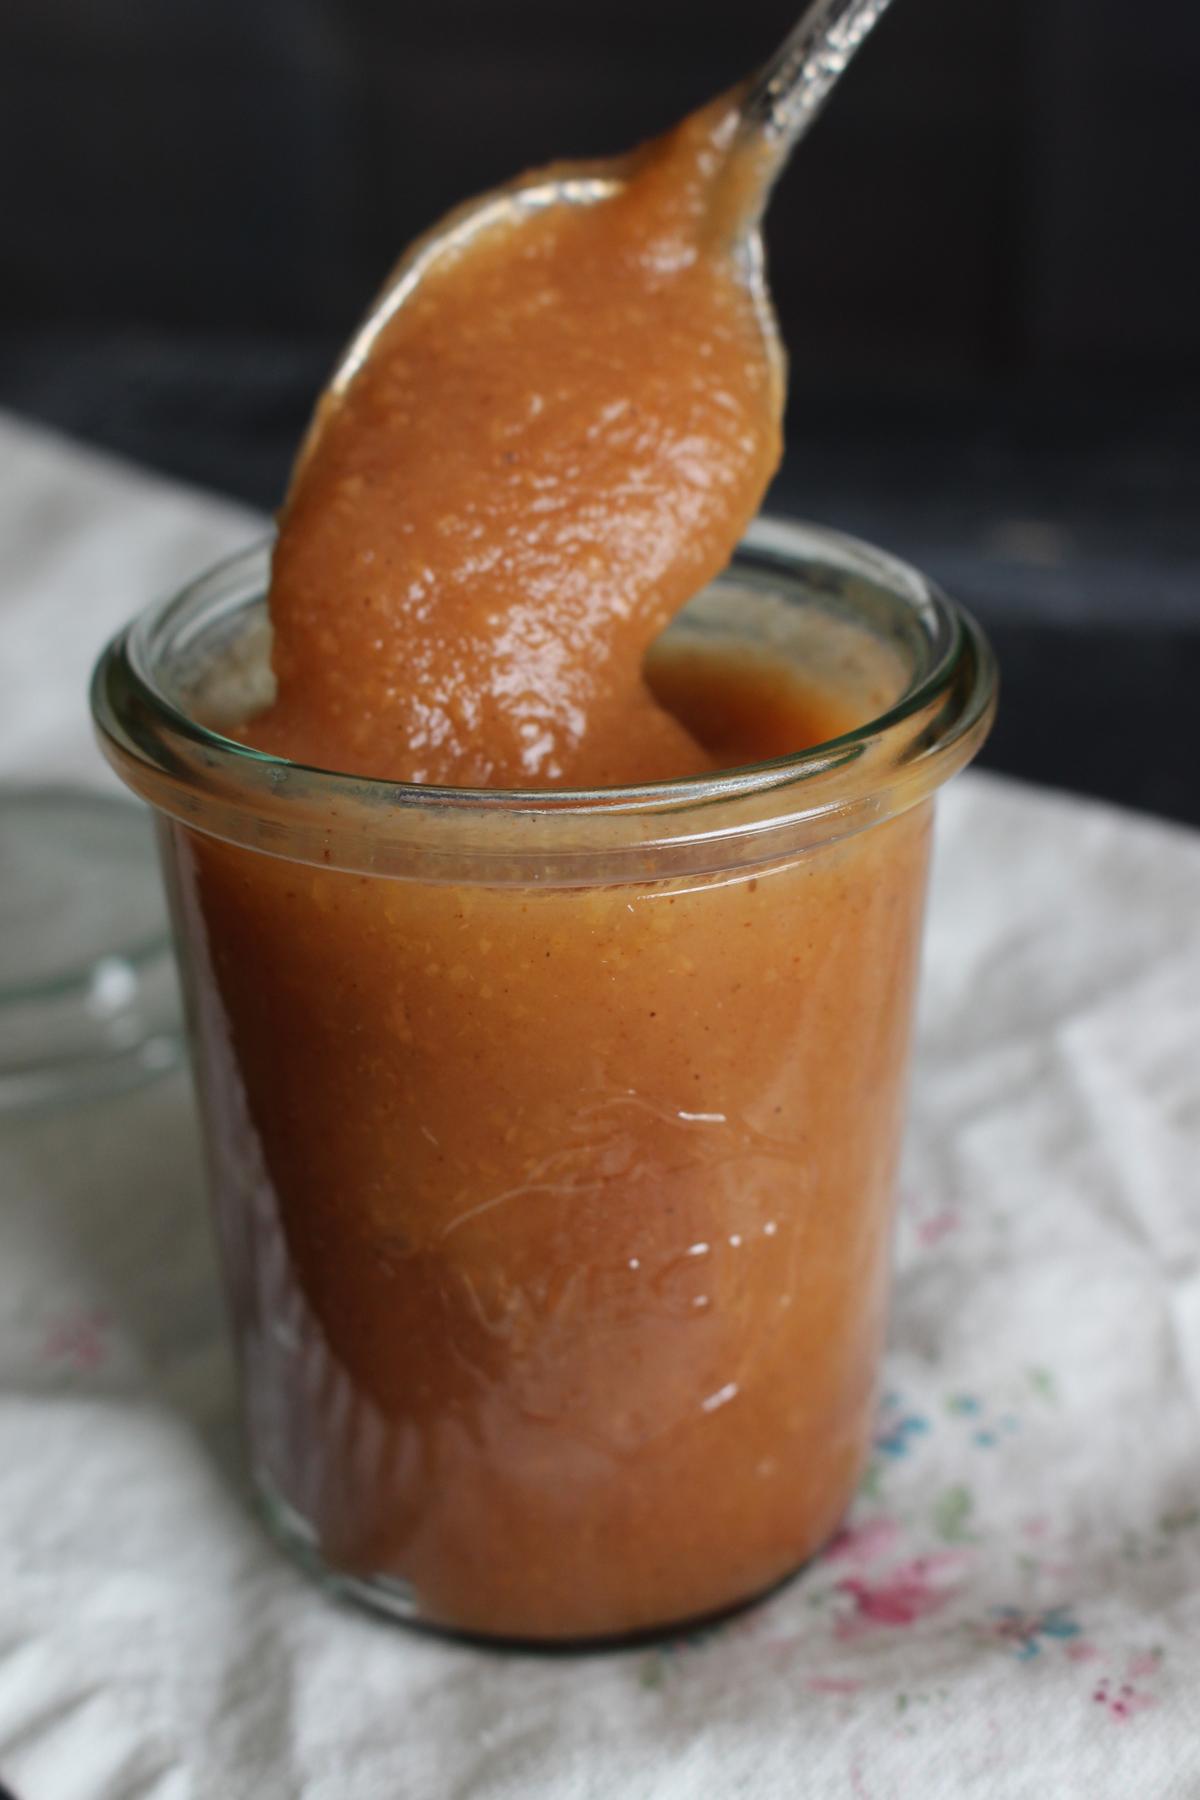 Velvety, warmly spiced apple butter goes well on toast, pancakes, and waffles—as well as grilled or roasted proteins. (Stephanie Thurow)